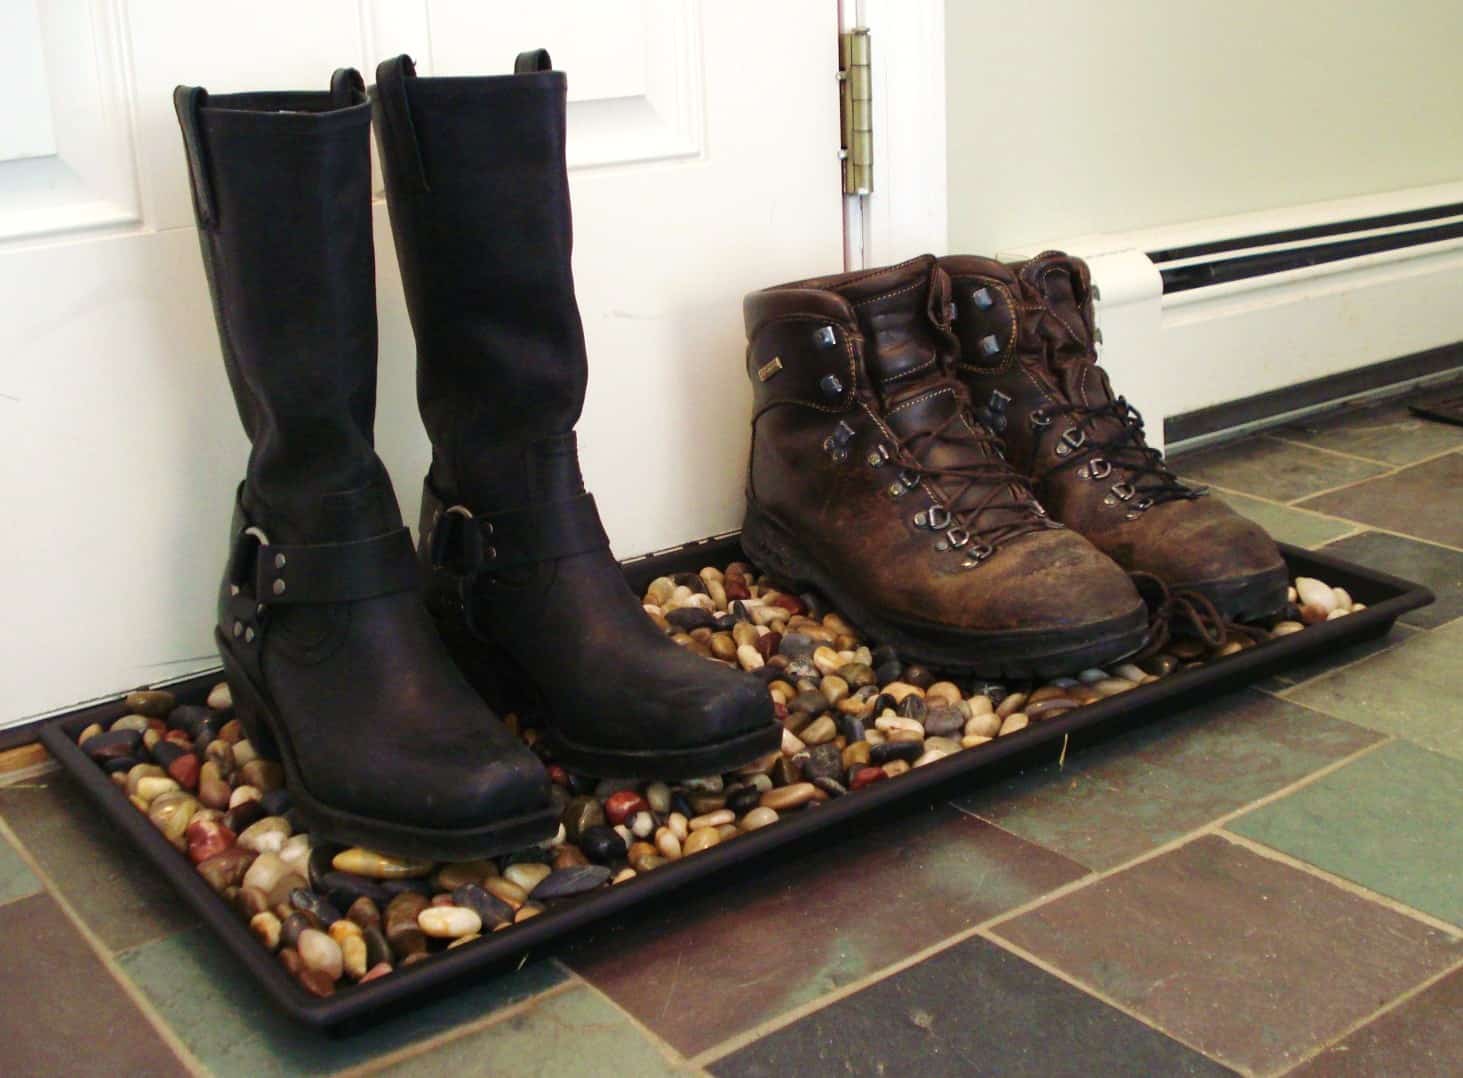 River rock boot tray